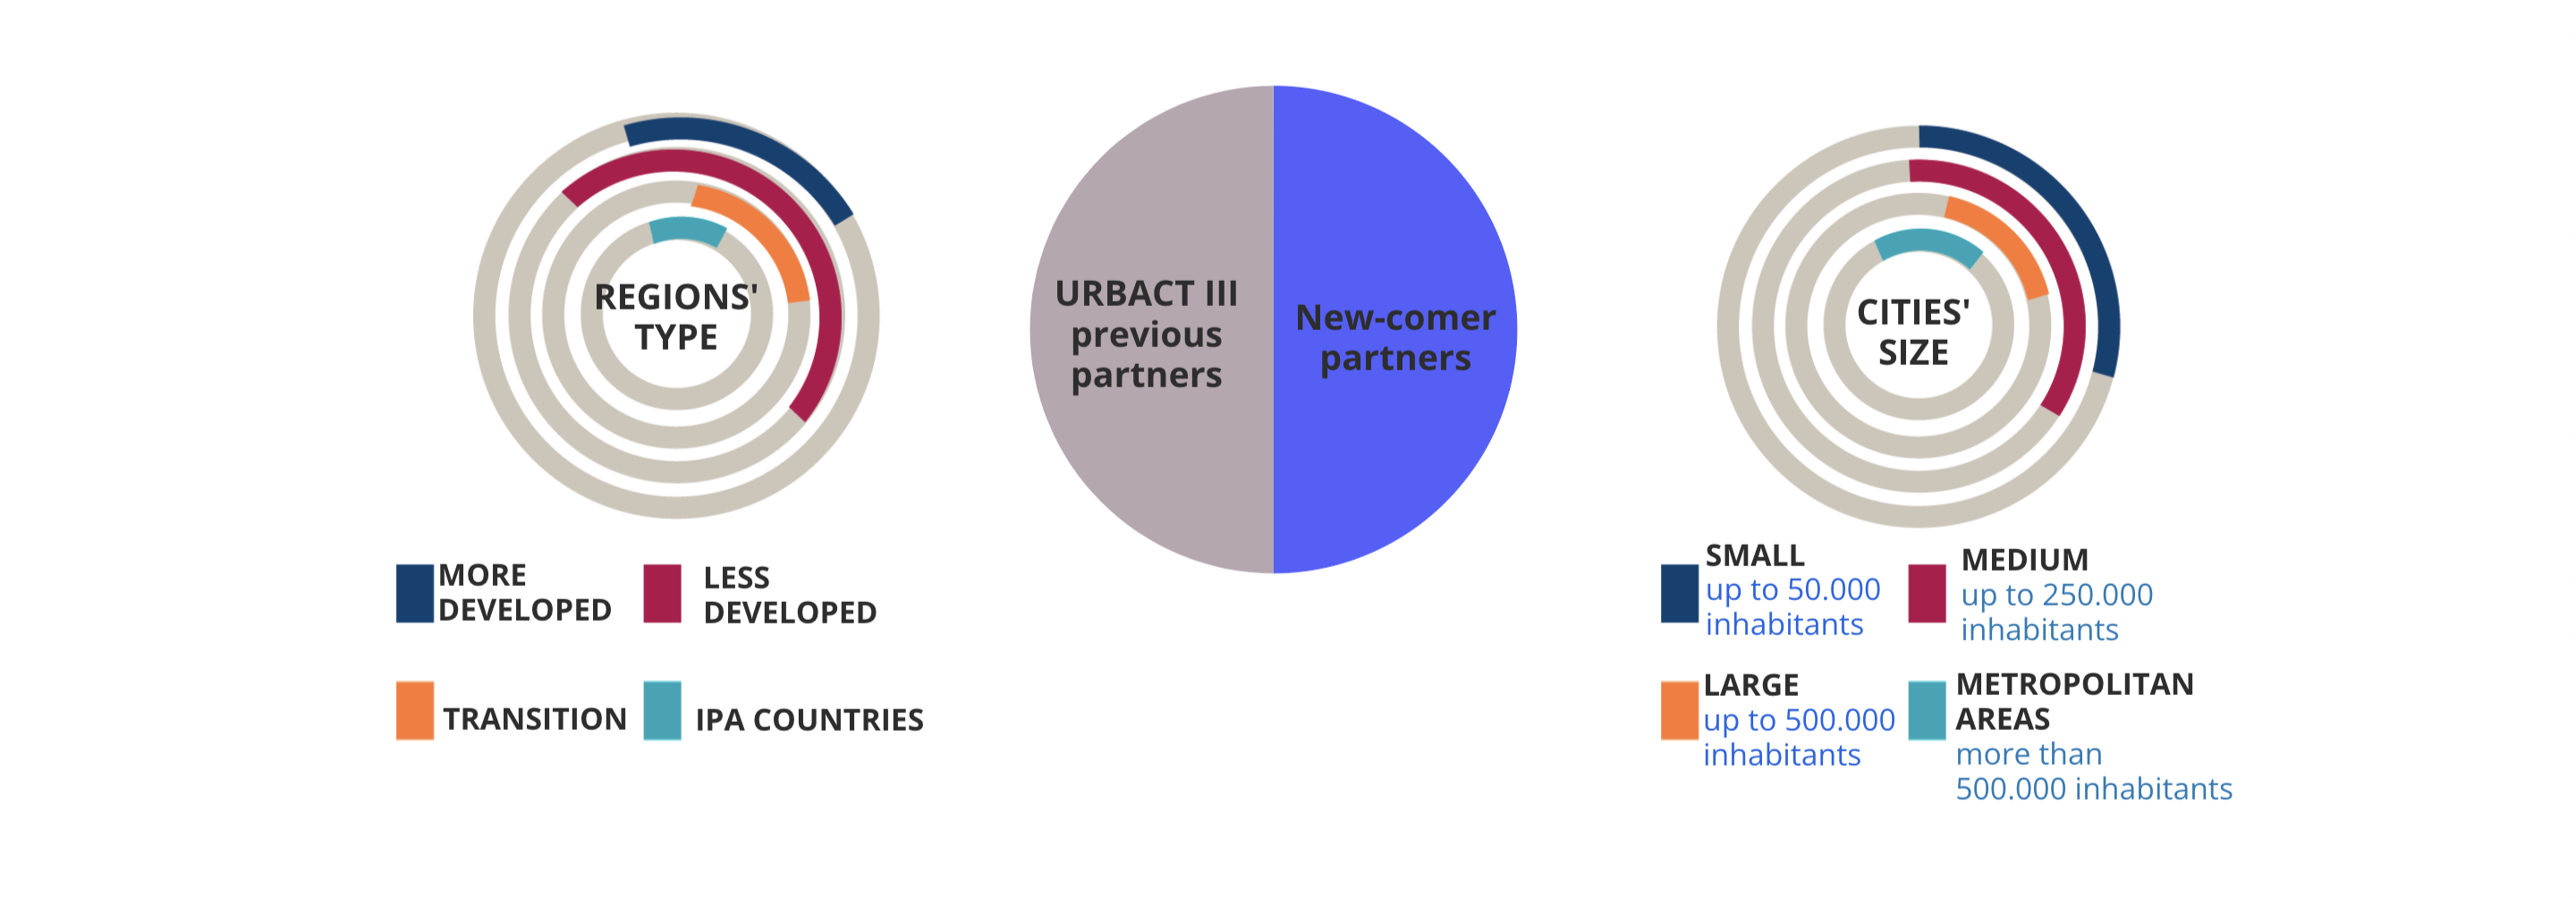 Networks approved by the URBACT IV Monitoring Committee. Source: URBACT 